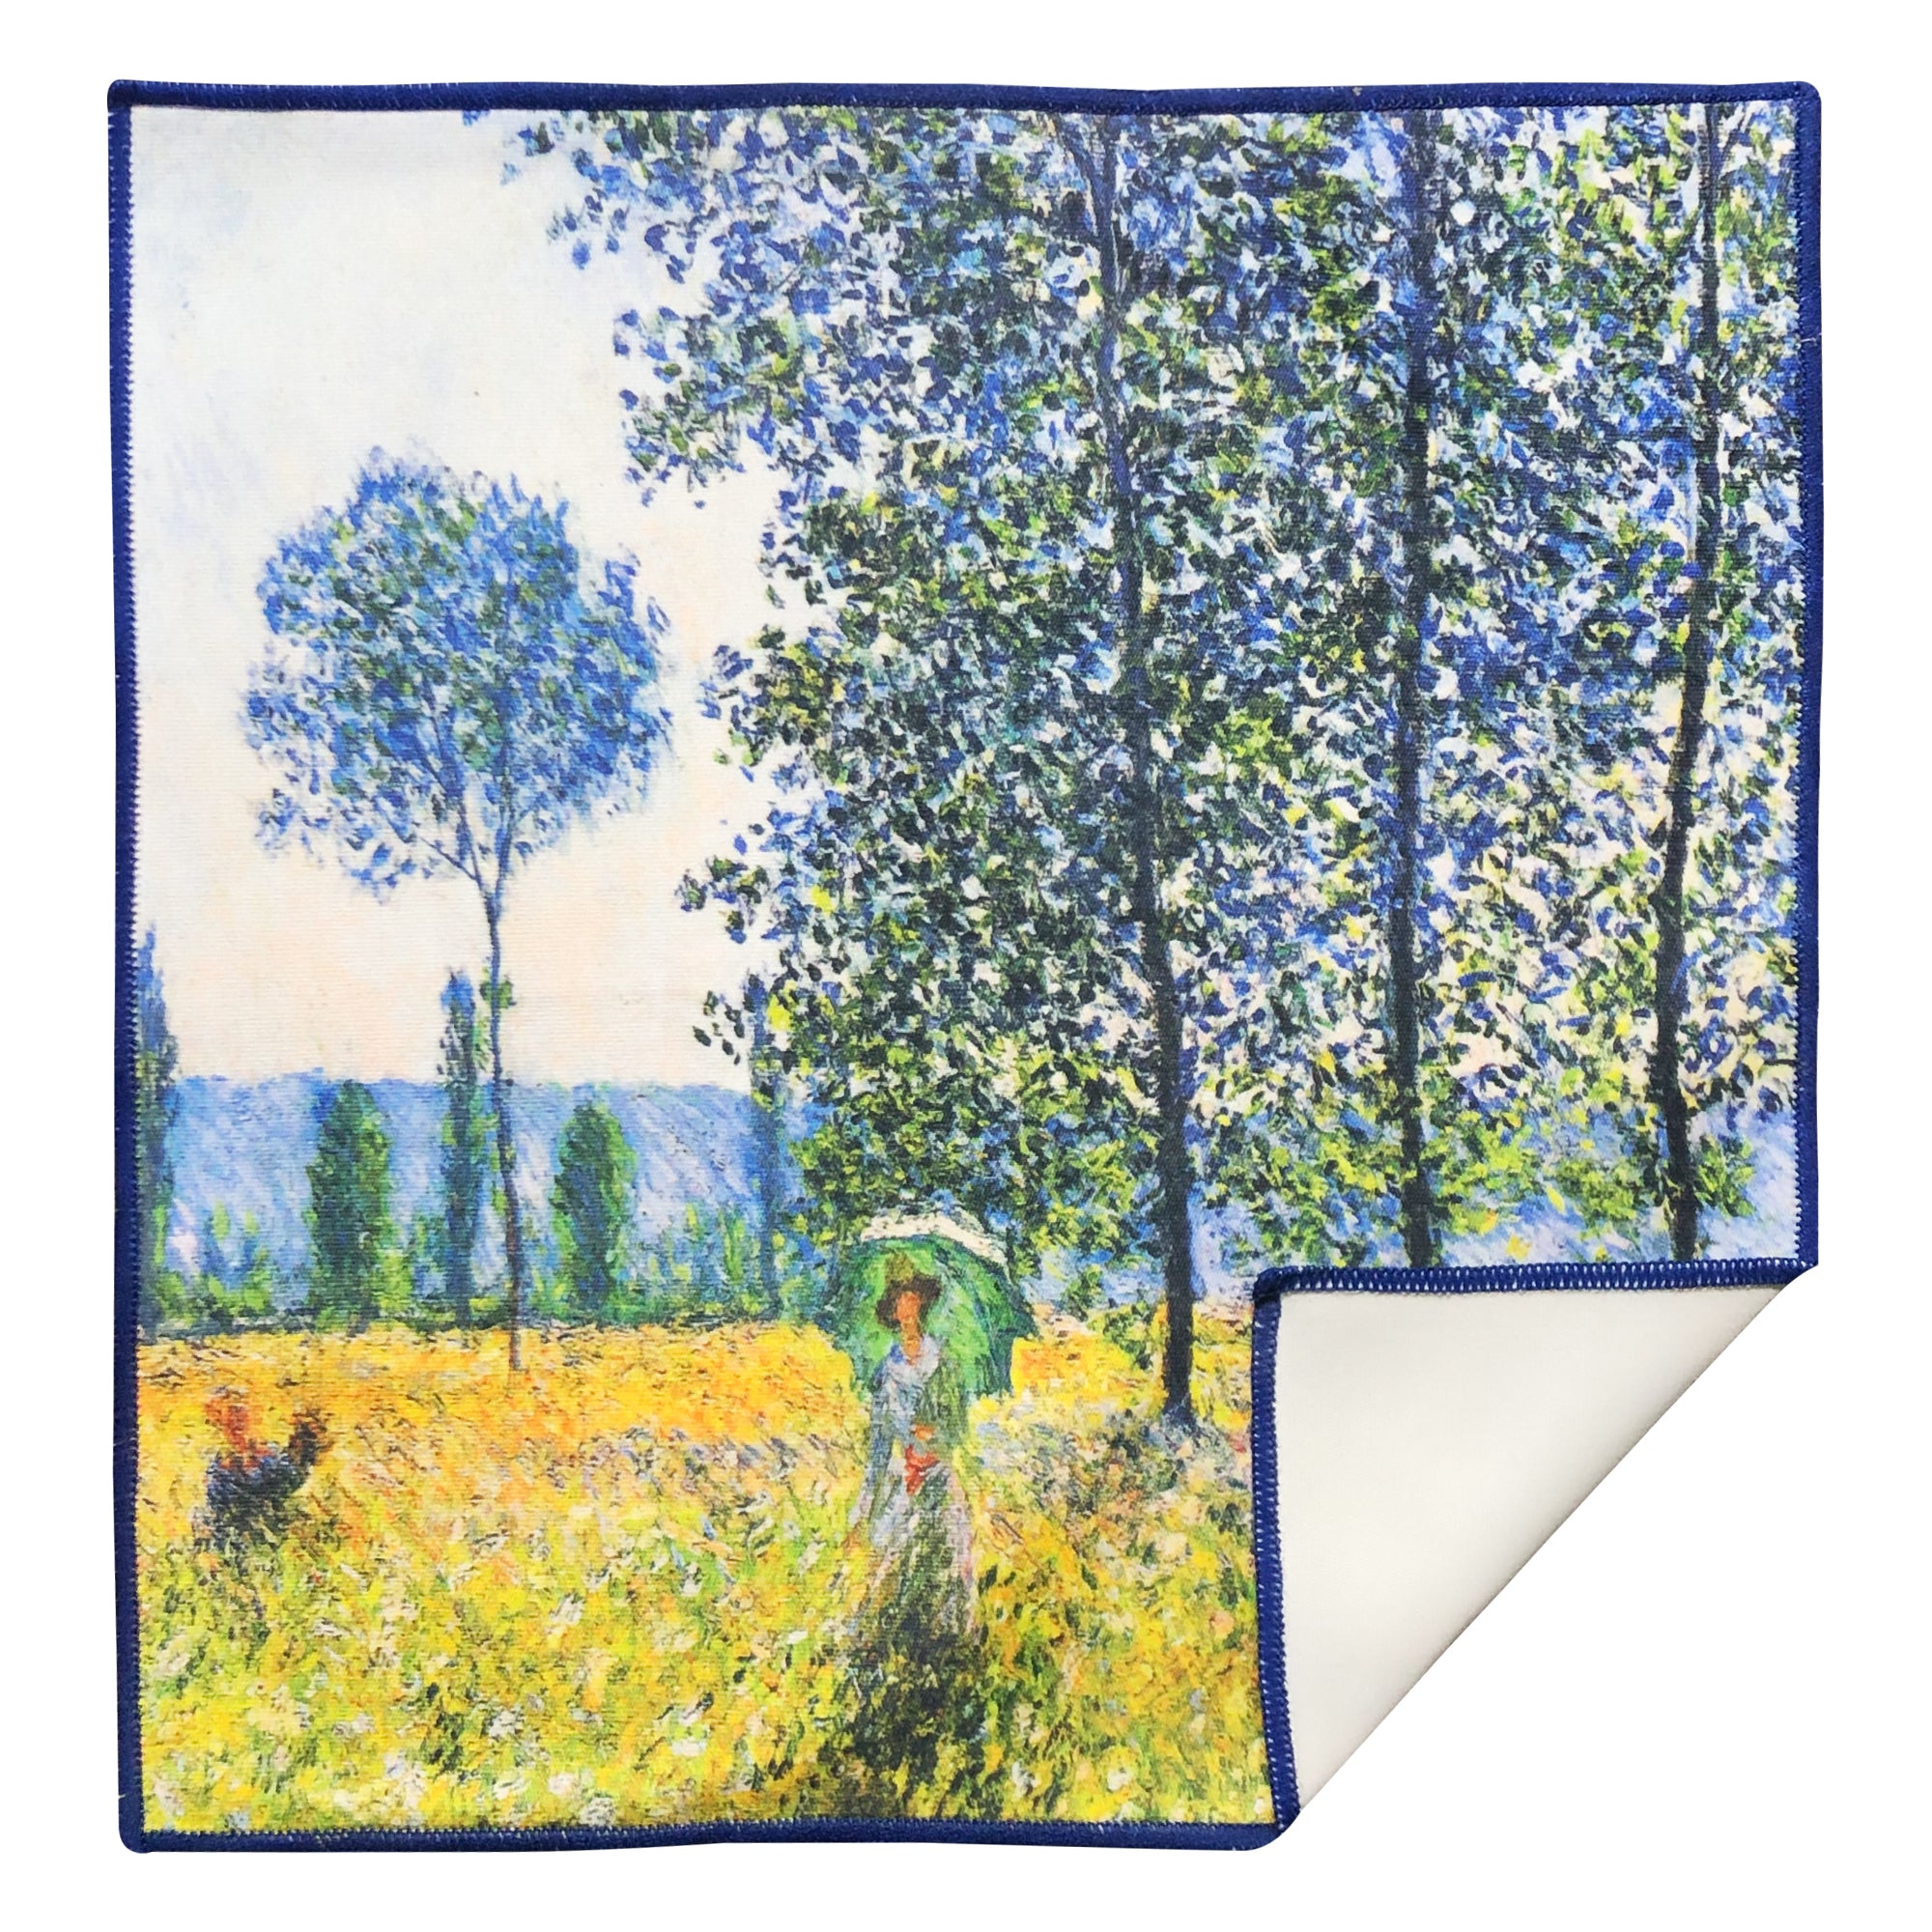 [6 Pack] Claude Monet "Sunlight Effect under the Poplars" - Art Collection - Ultra Premium Quality Microfiber Cleaning Cloths